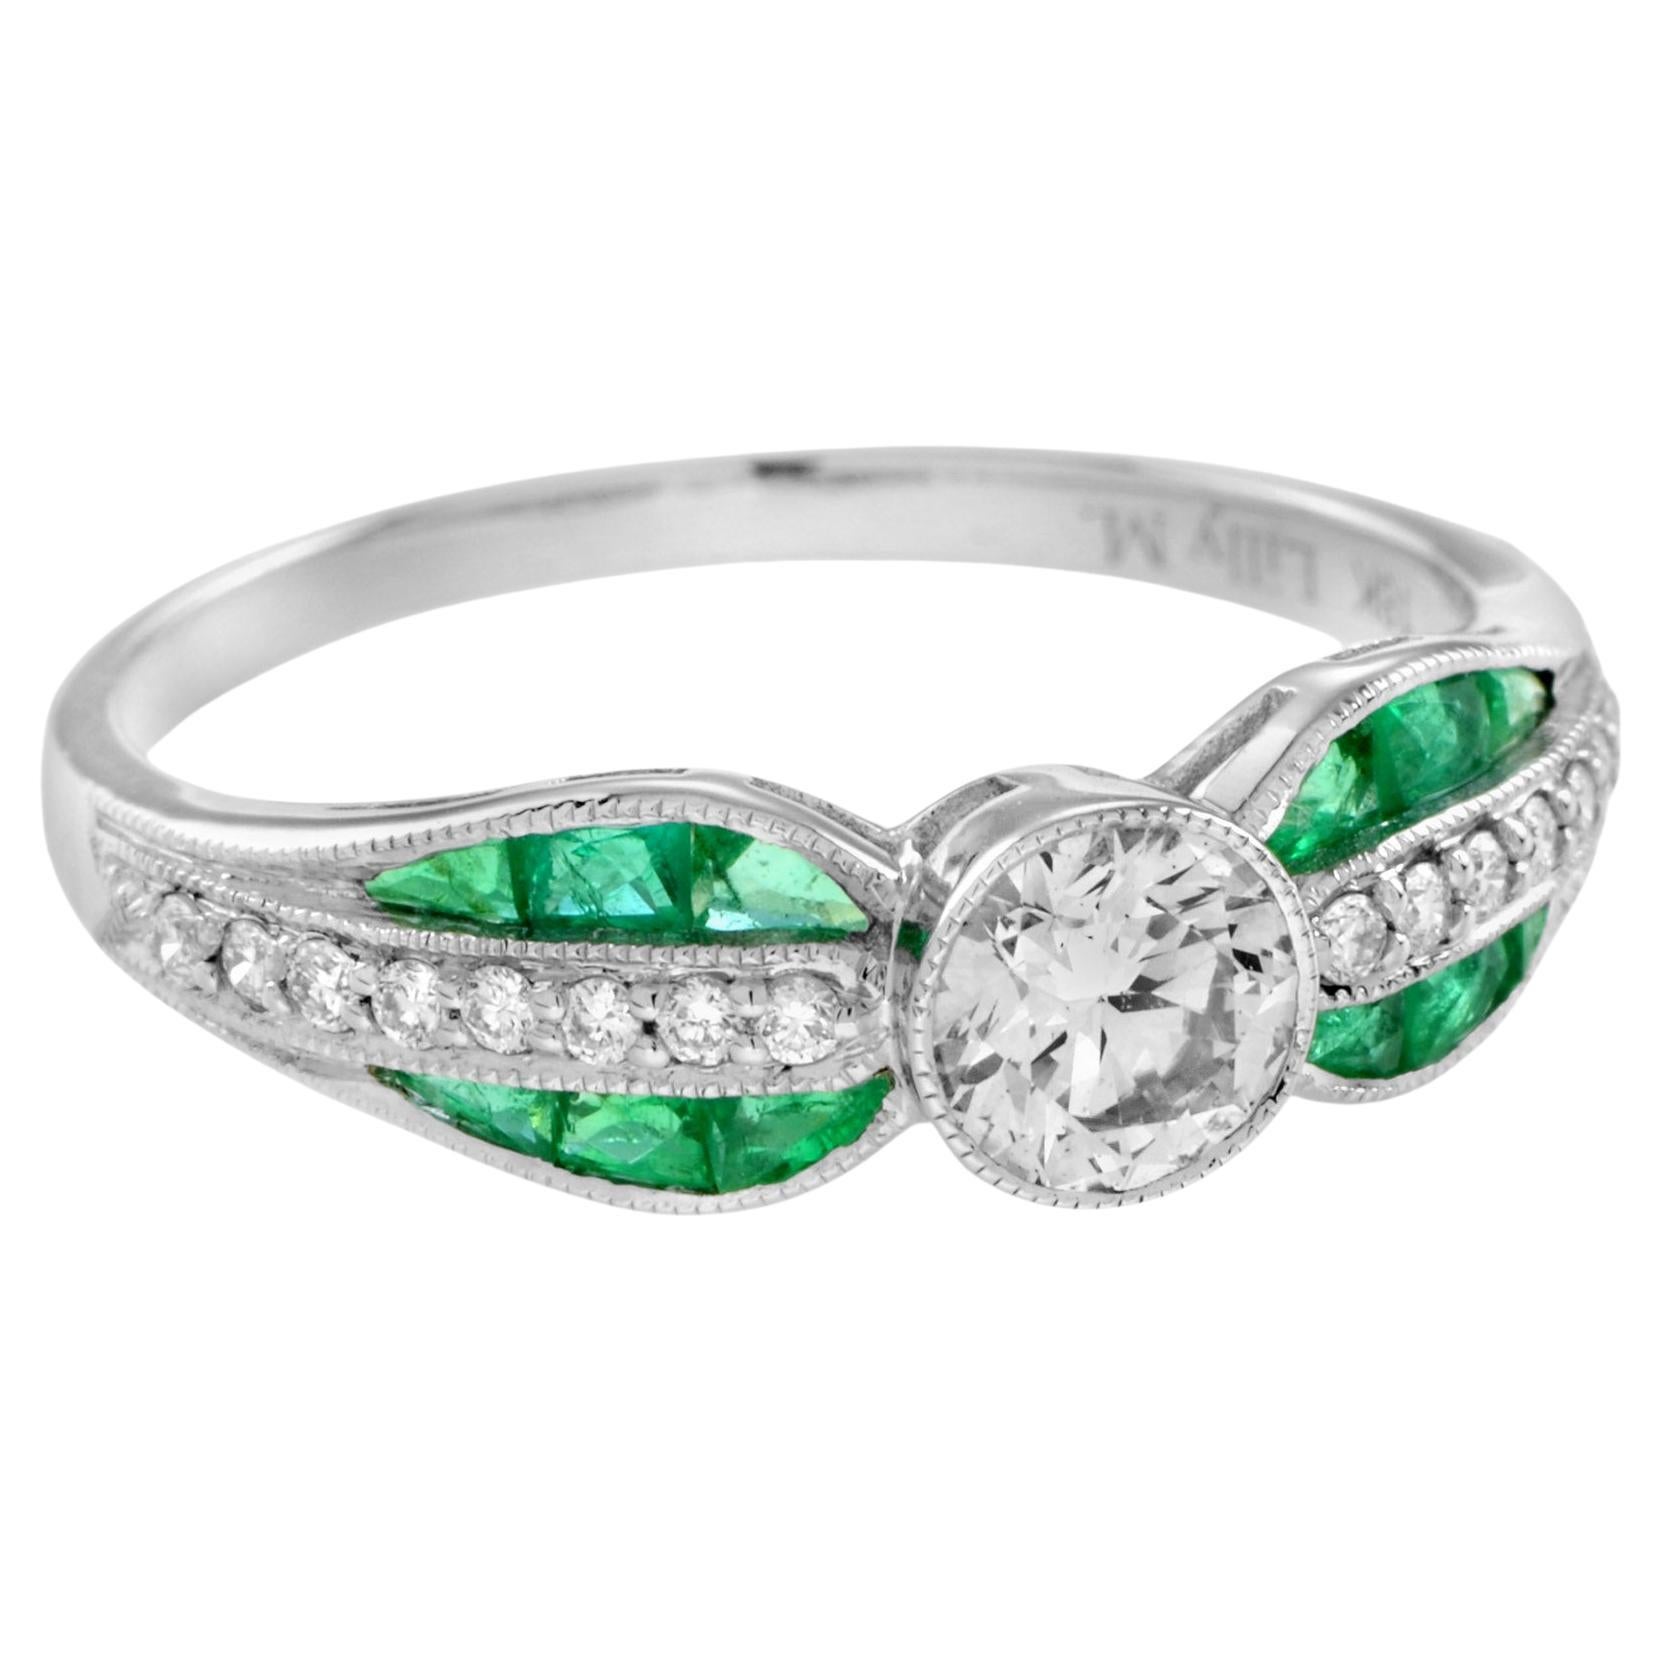 Diamond and Emerald Art Deco Style Solitaire Ring in 18K White Gold